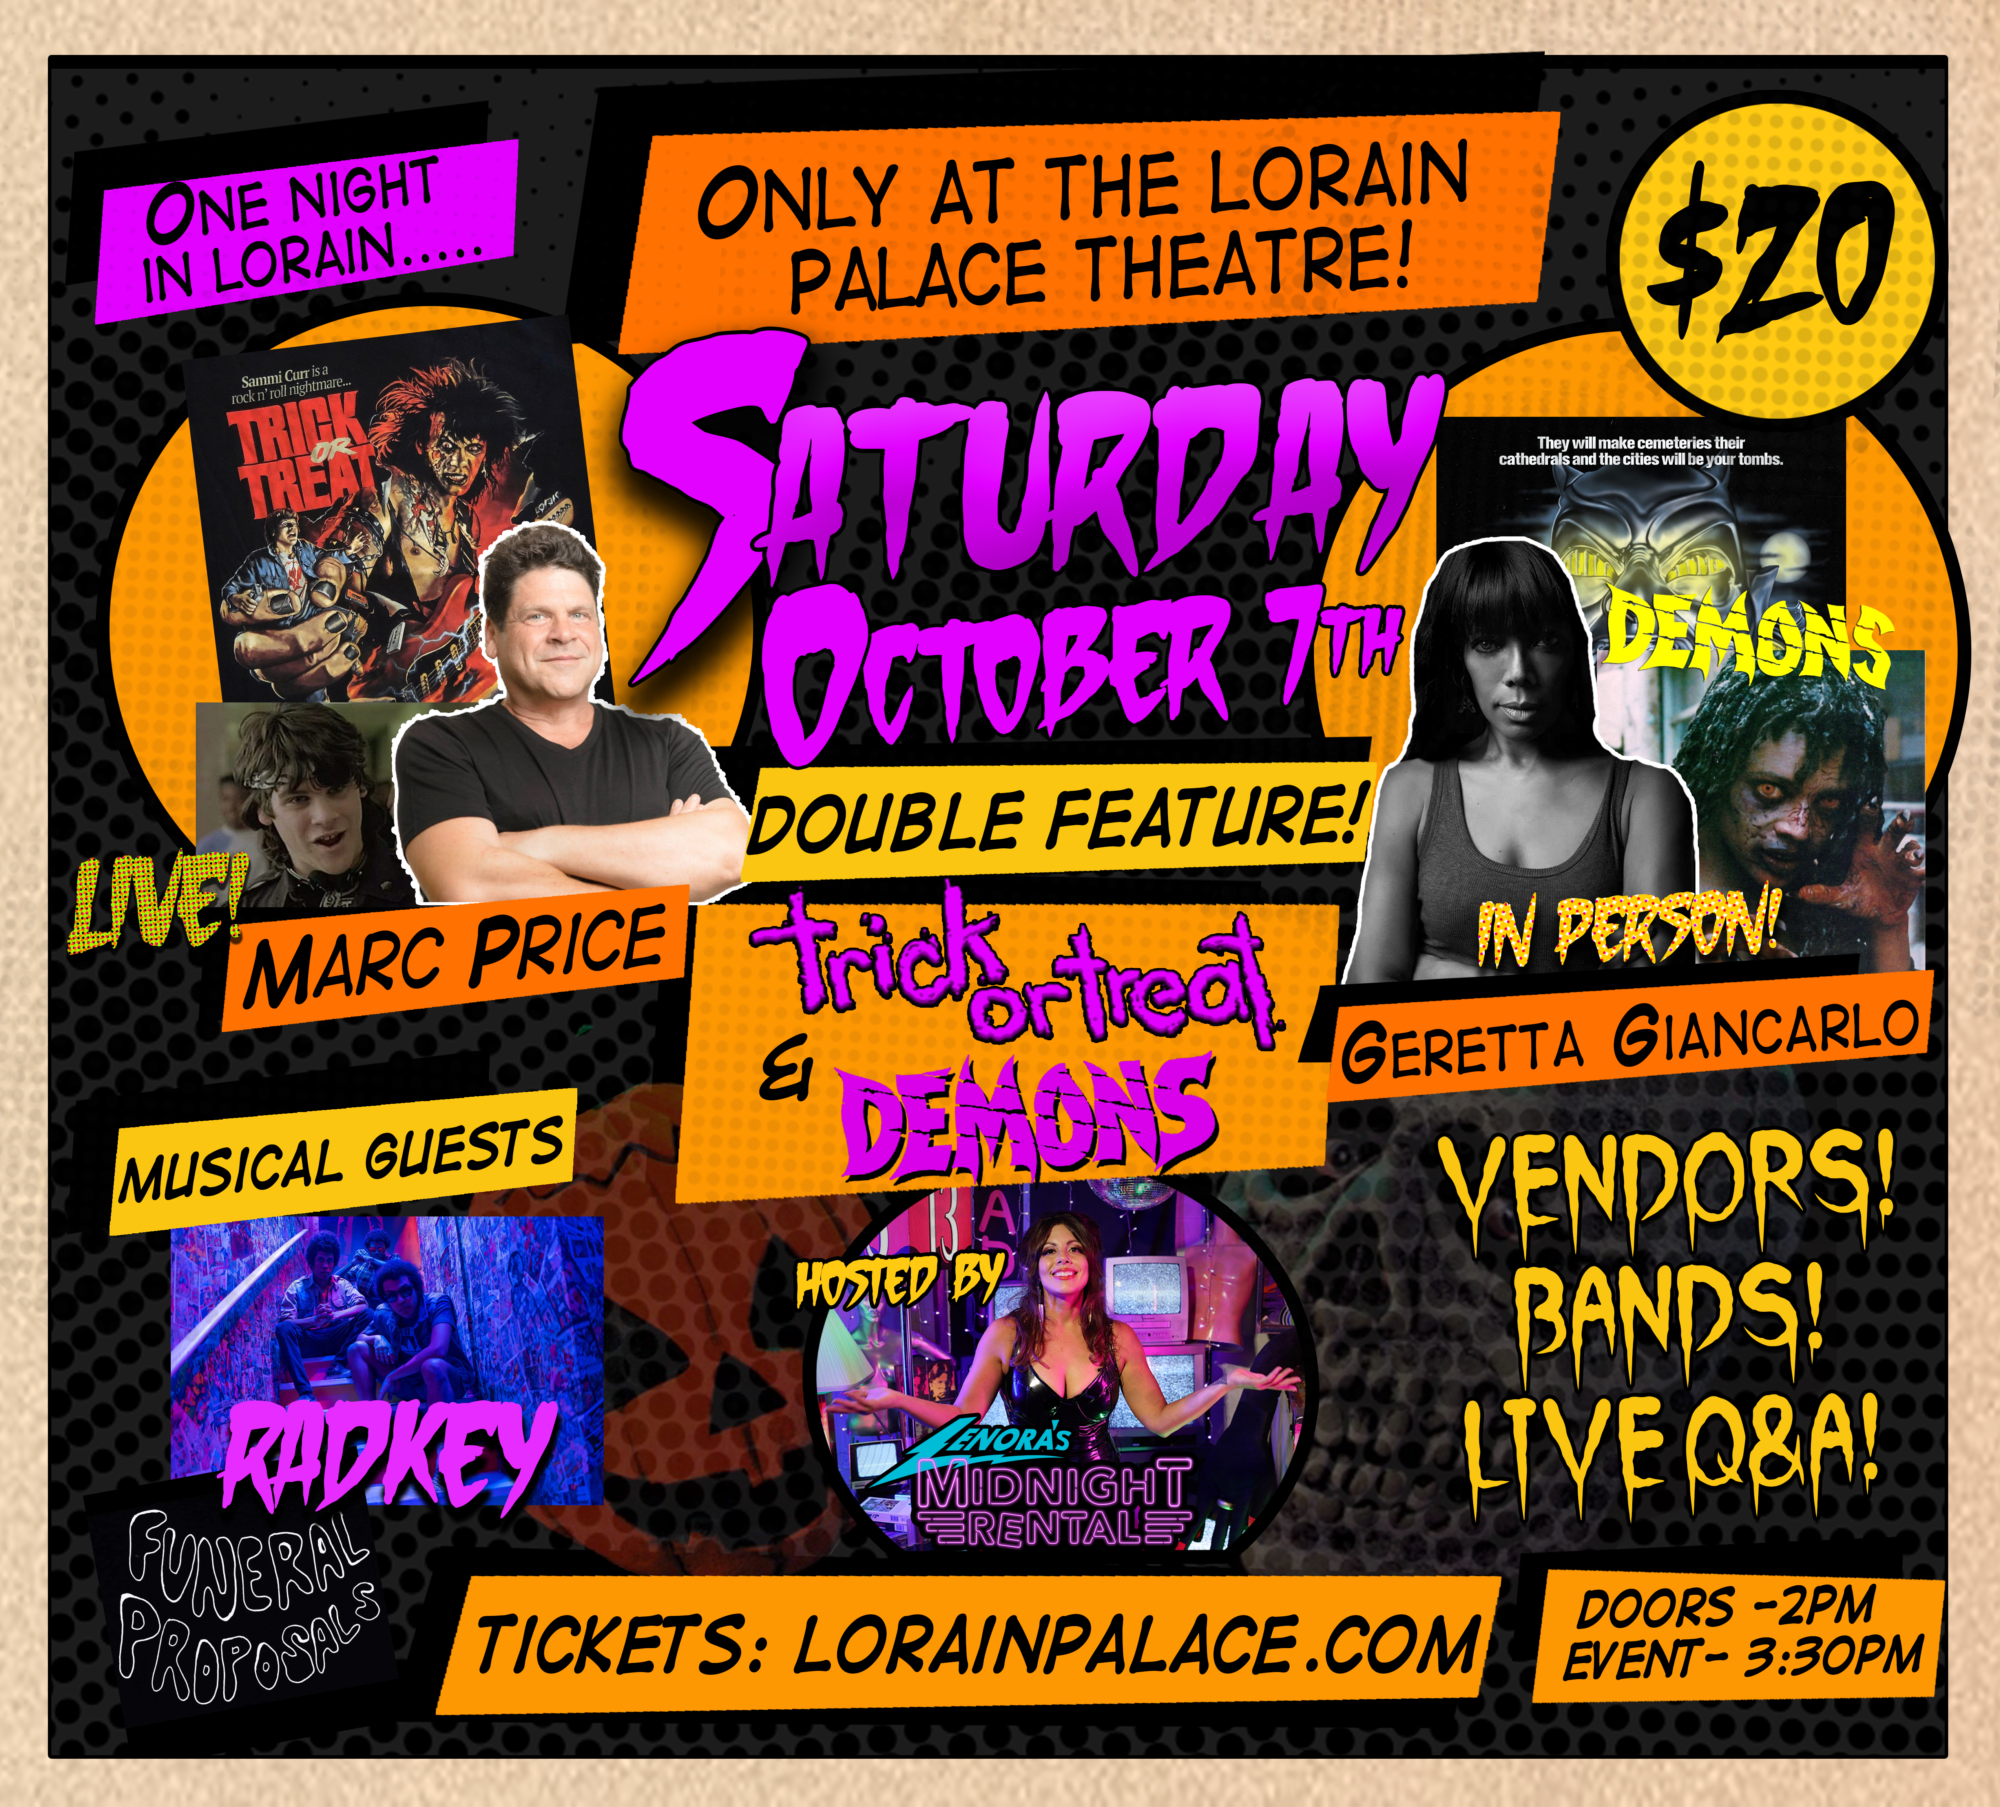 A poster for the lorain palace theatre 's halloween event.